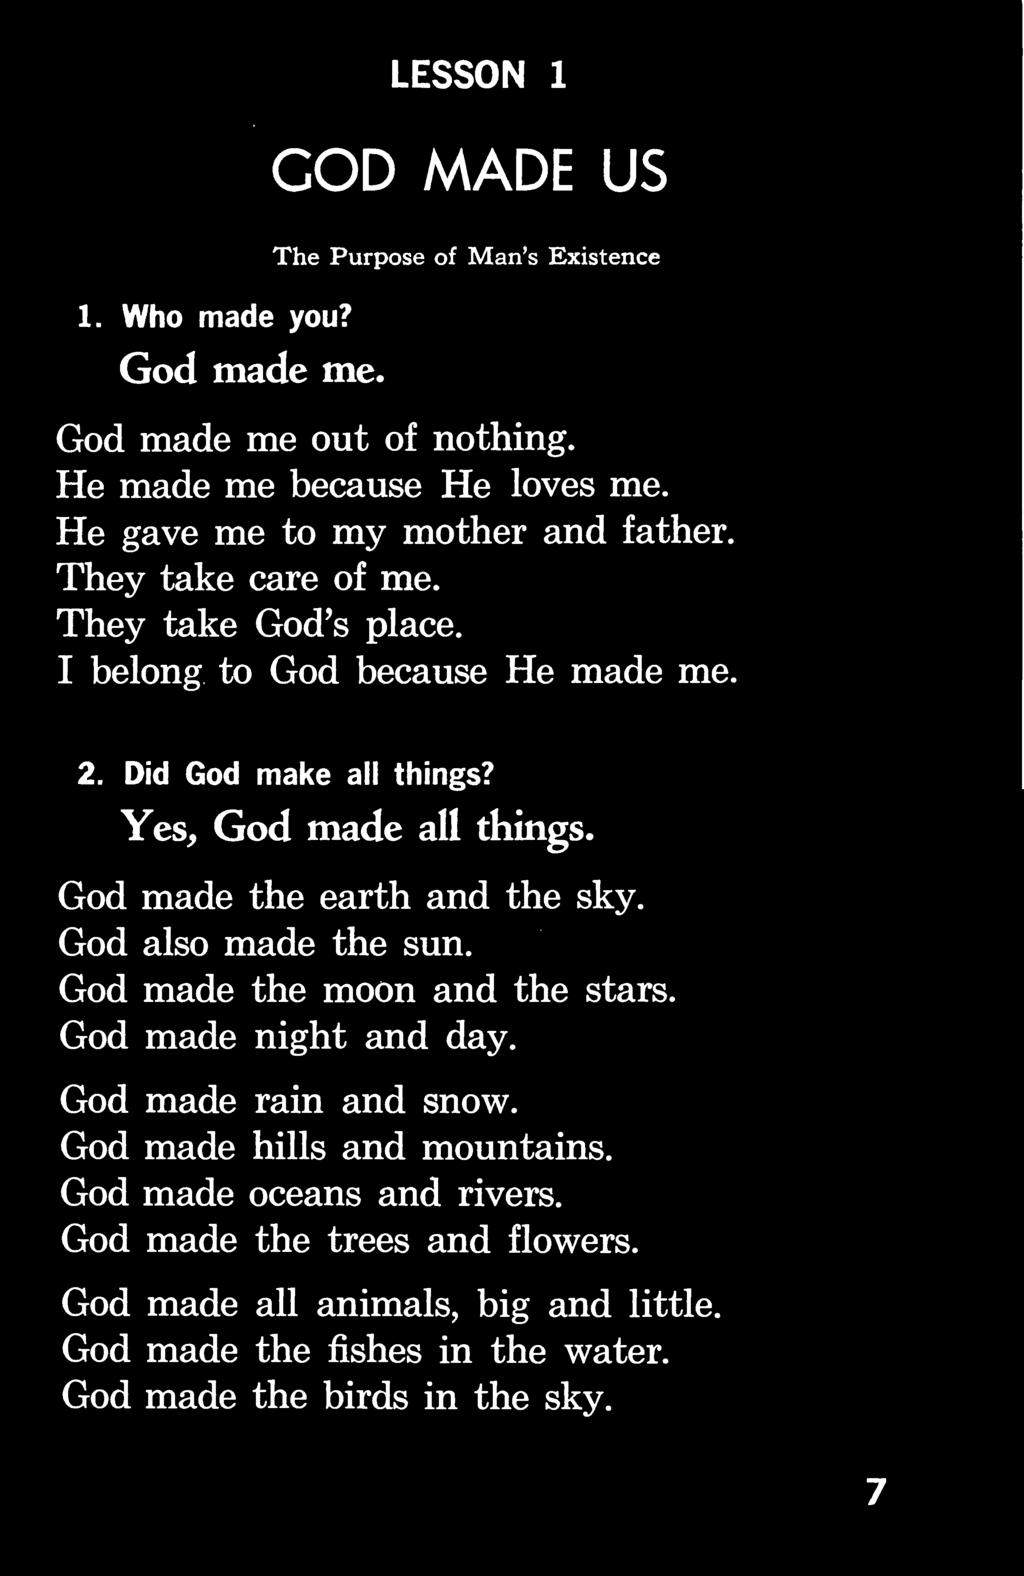 Yes, God made all things. God made the earth and the sky. God also made the sun. God made the moon and the stars. God made night and day. God made rain and snow.